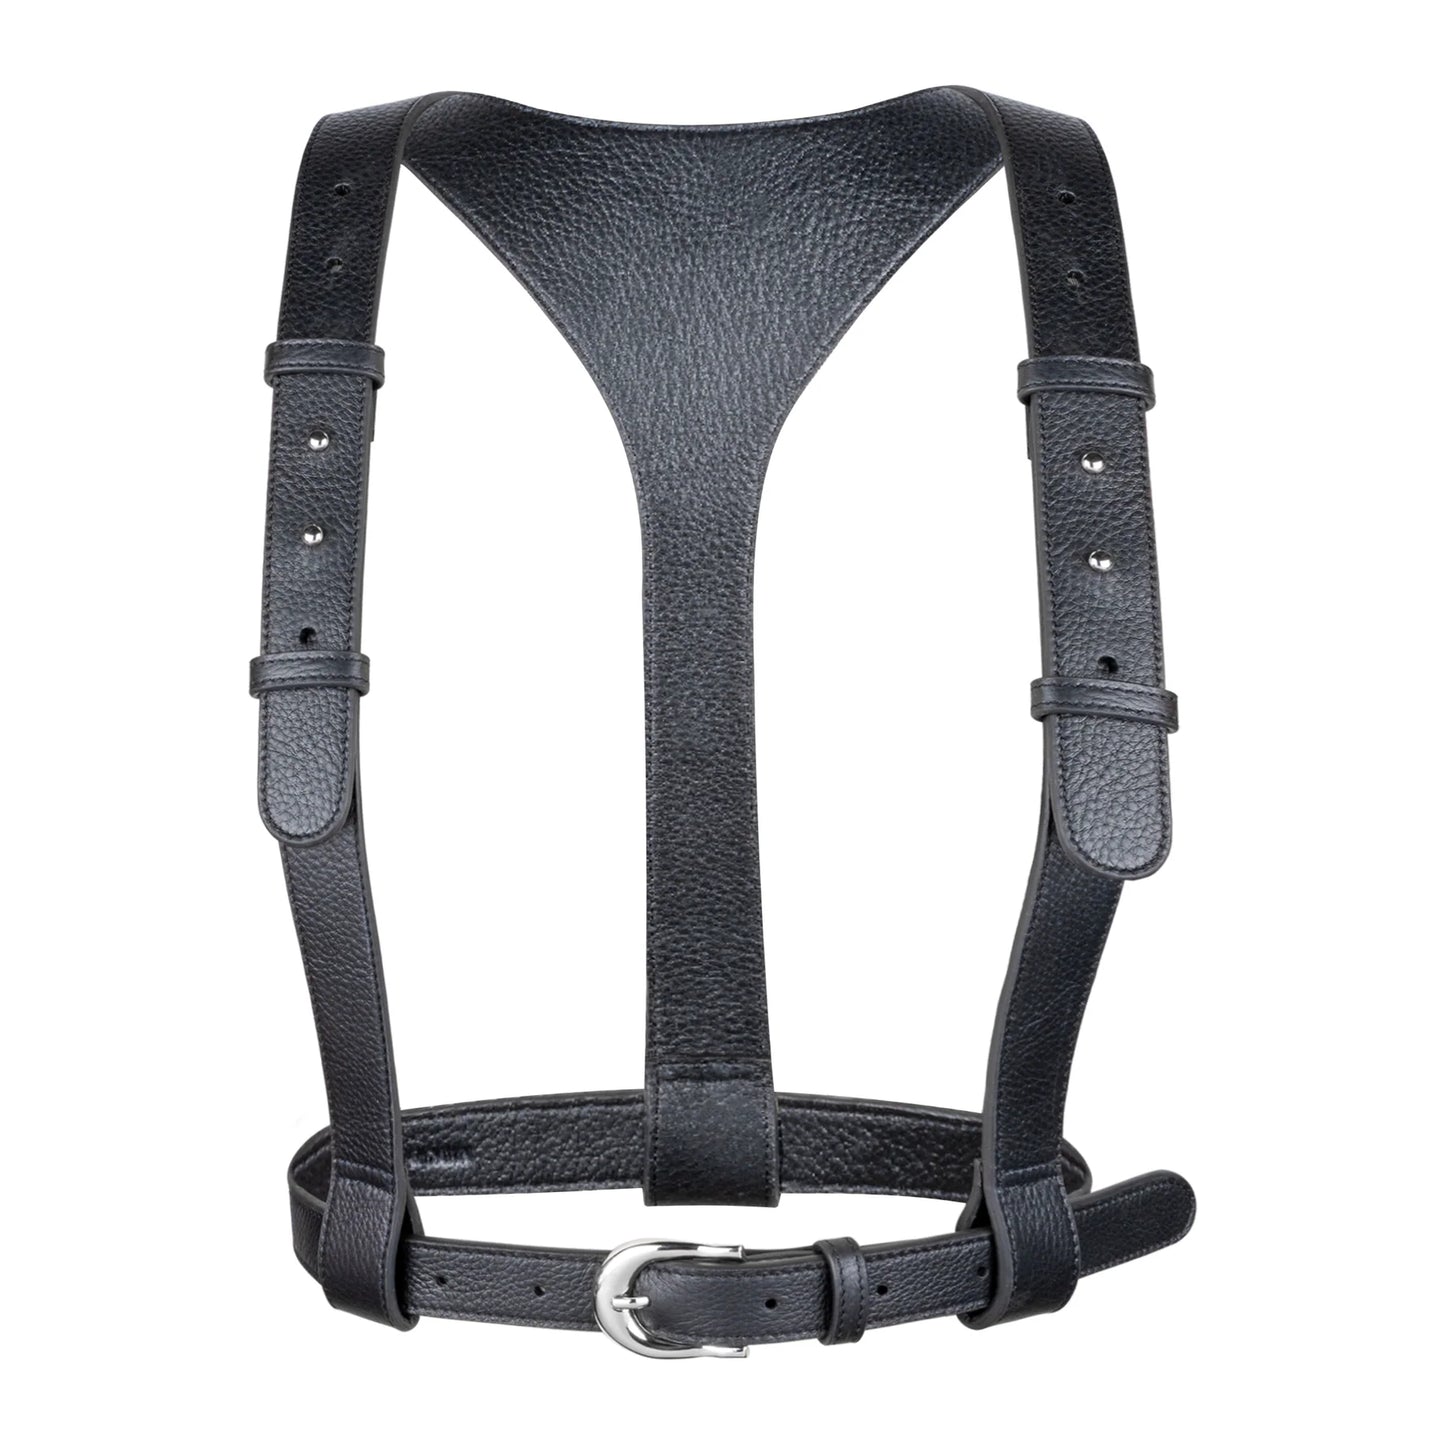 Zheng modular leather harness w/removable straps